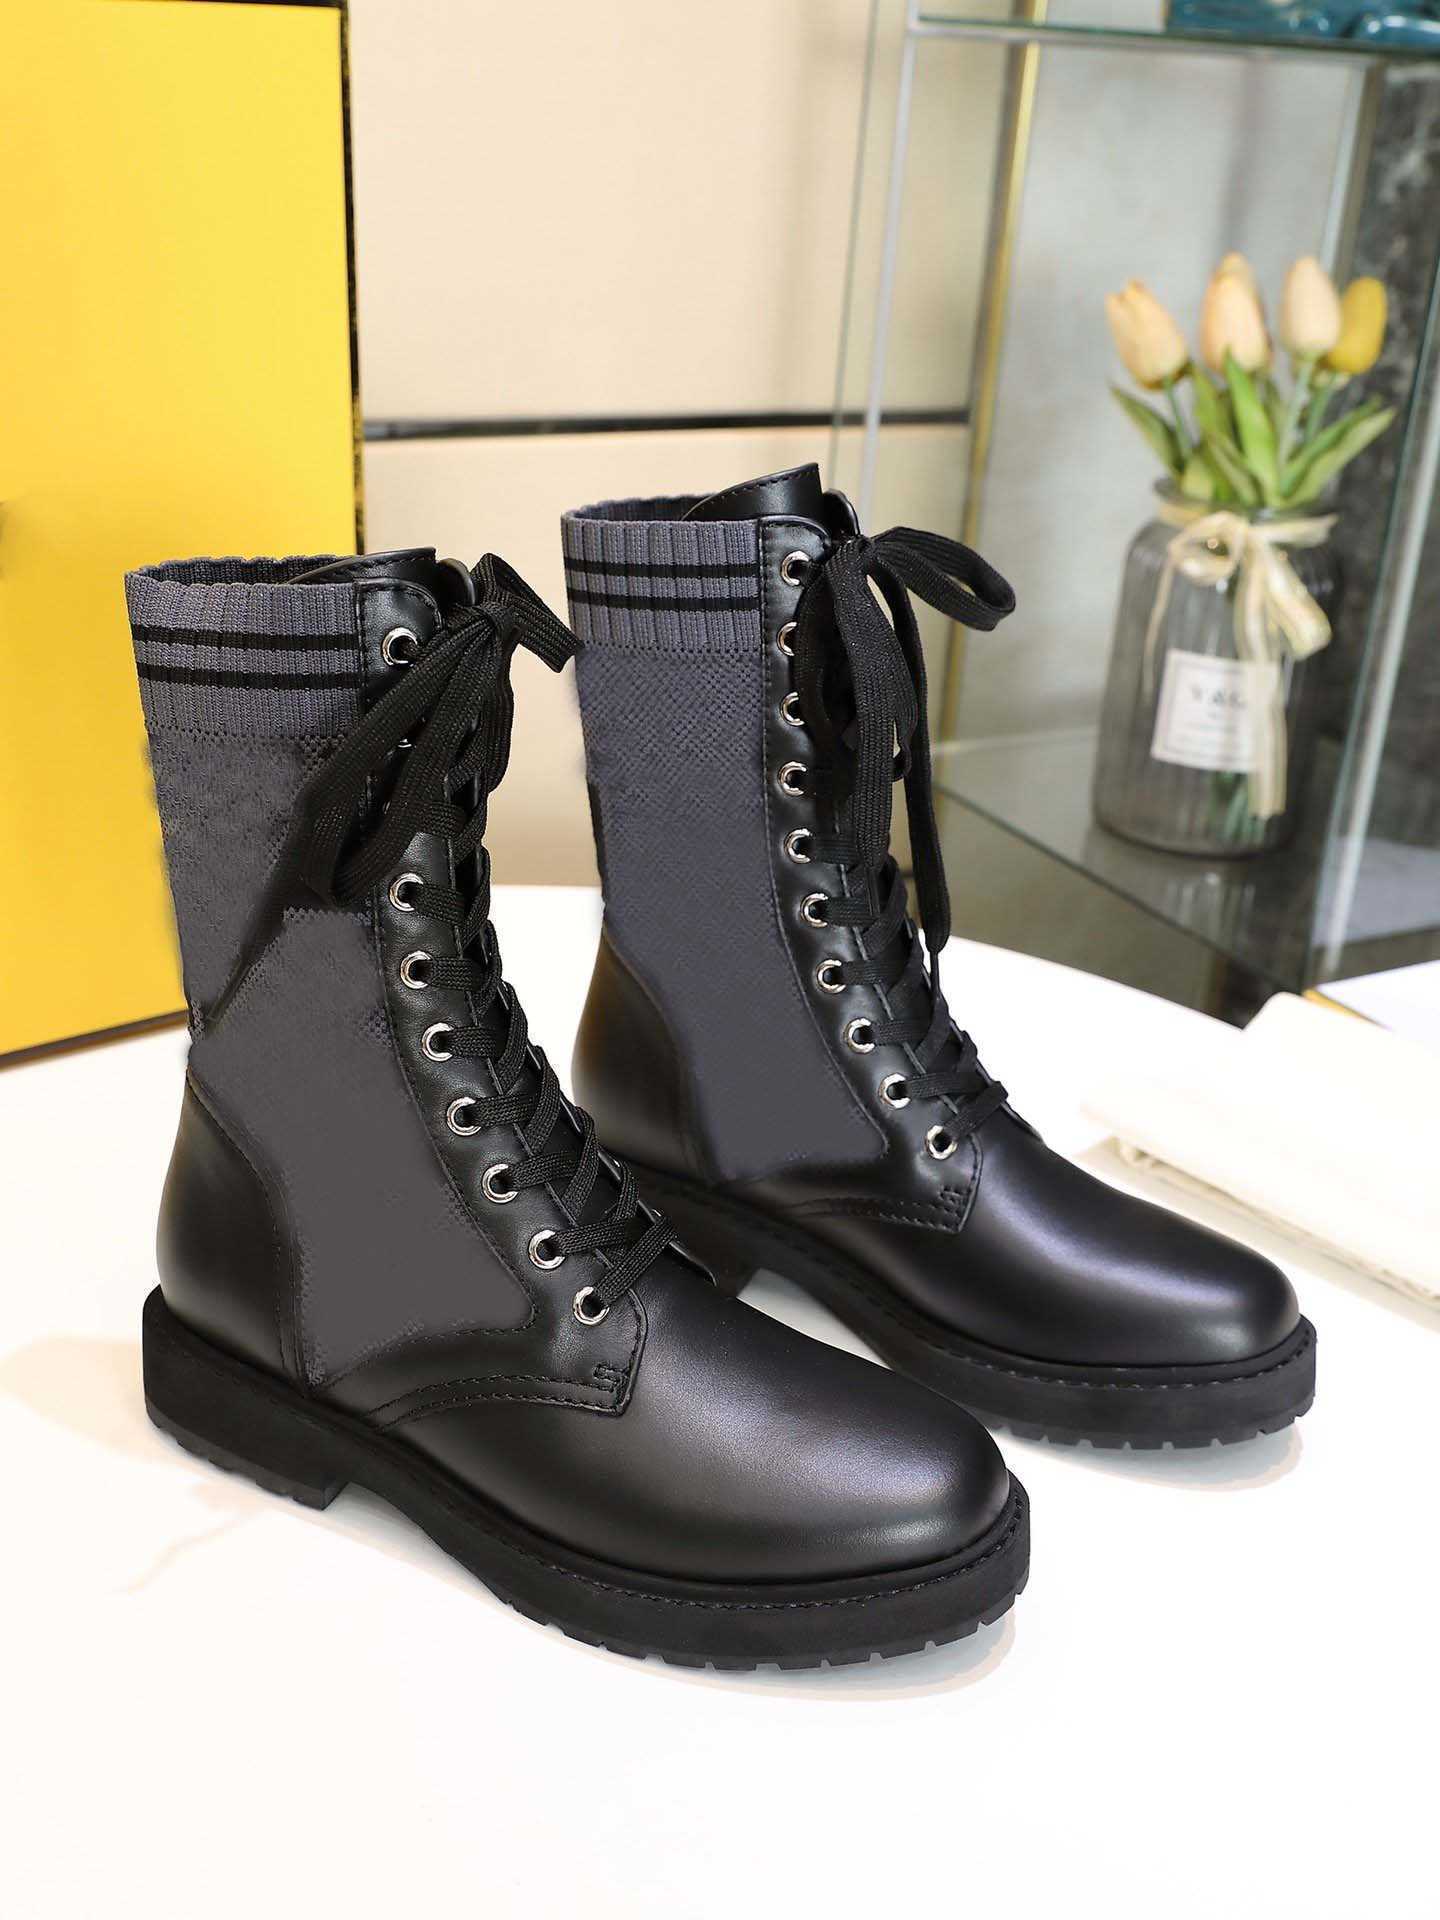 2022 Luxury Designer Women ROCKOKO Black Leather Biker Boots with Stretch Fabric Lady Combat Ankle Flat Shoes SIZE EUR 35-42